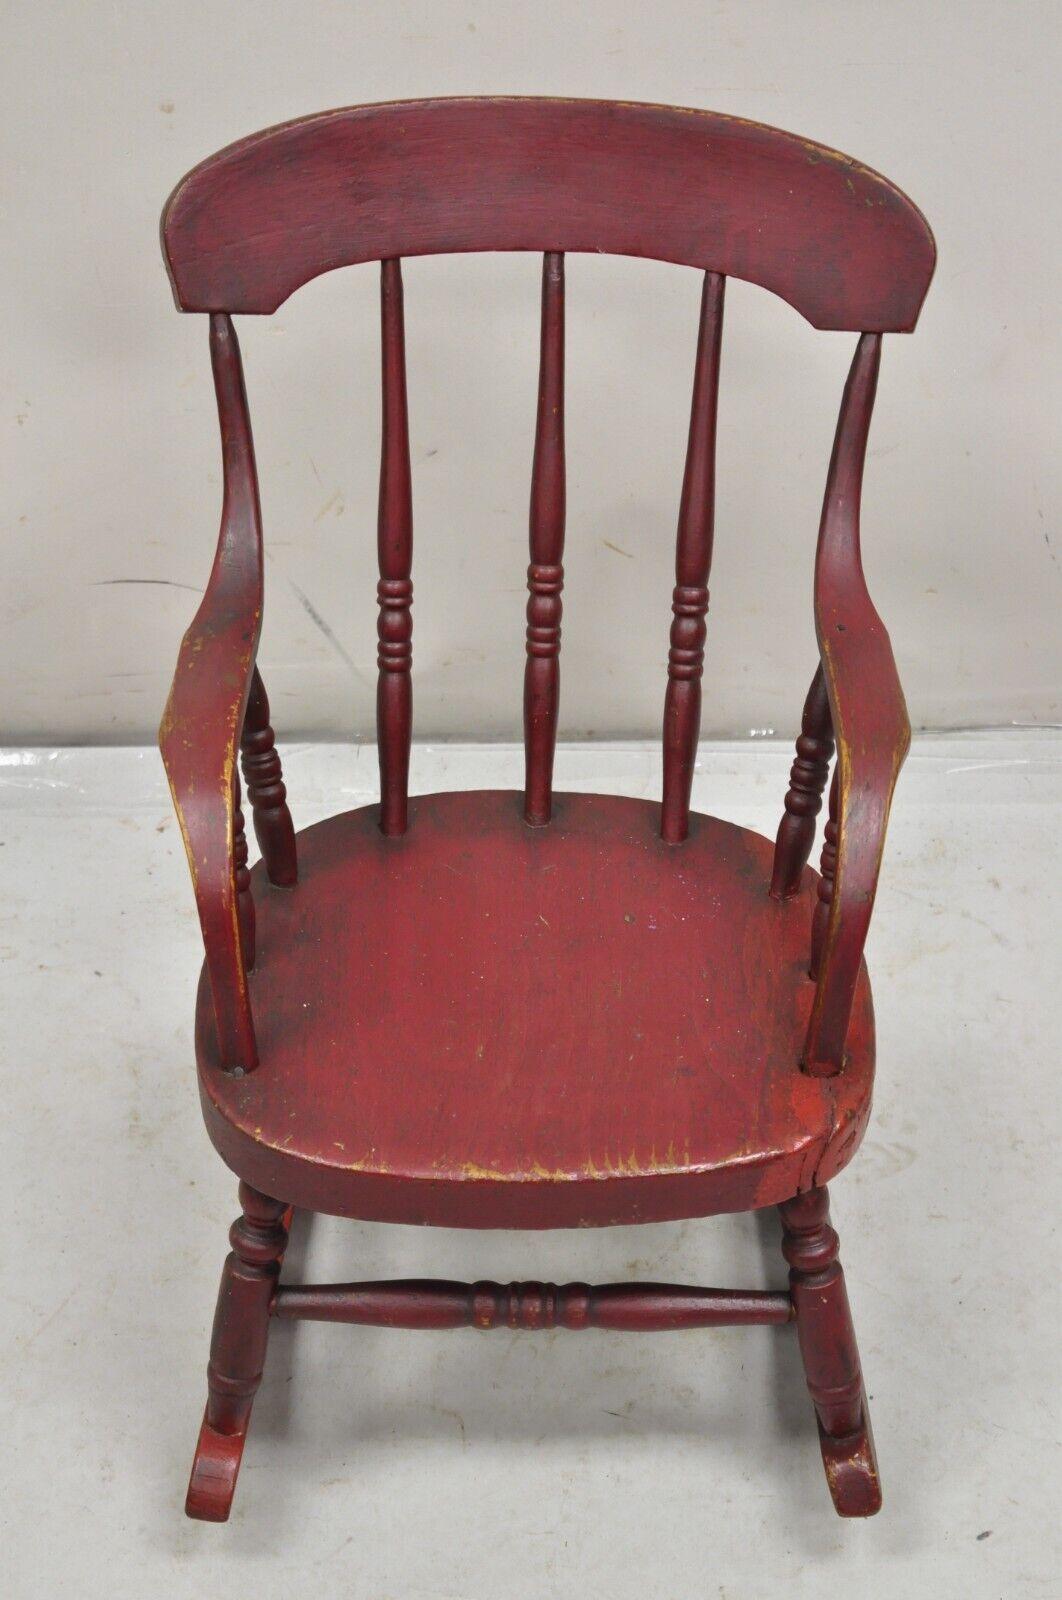 Antique American Primitive Spindle Back Small Child's Rocker Rocking Chair For Sale 7